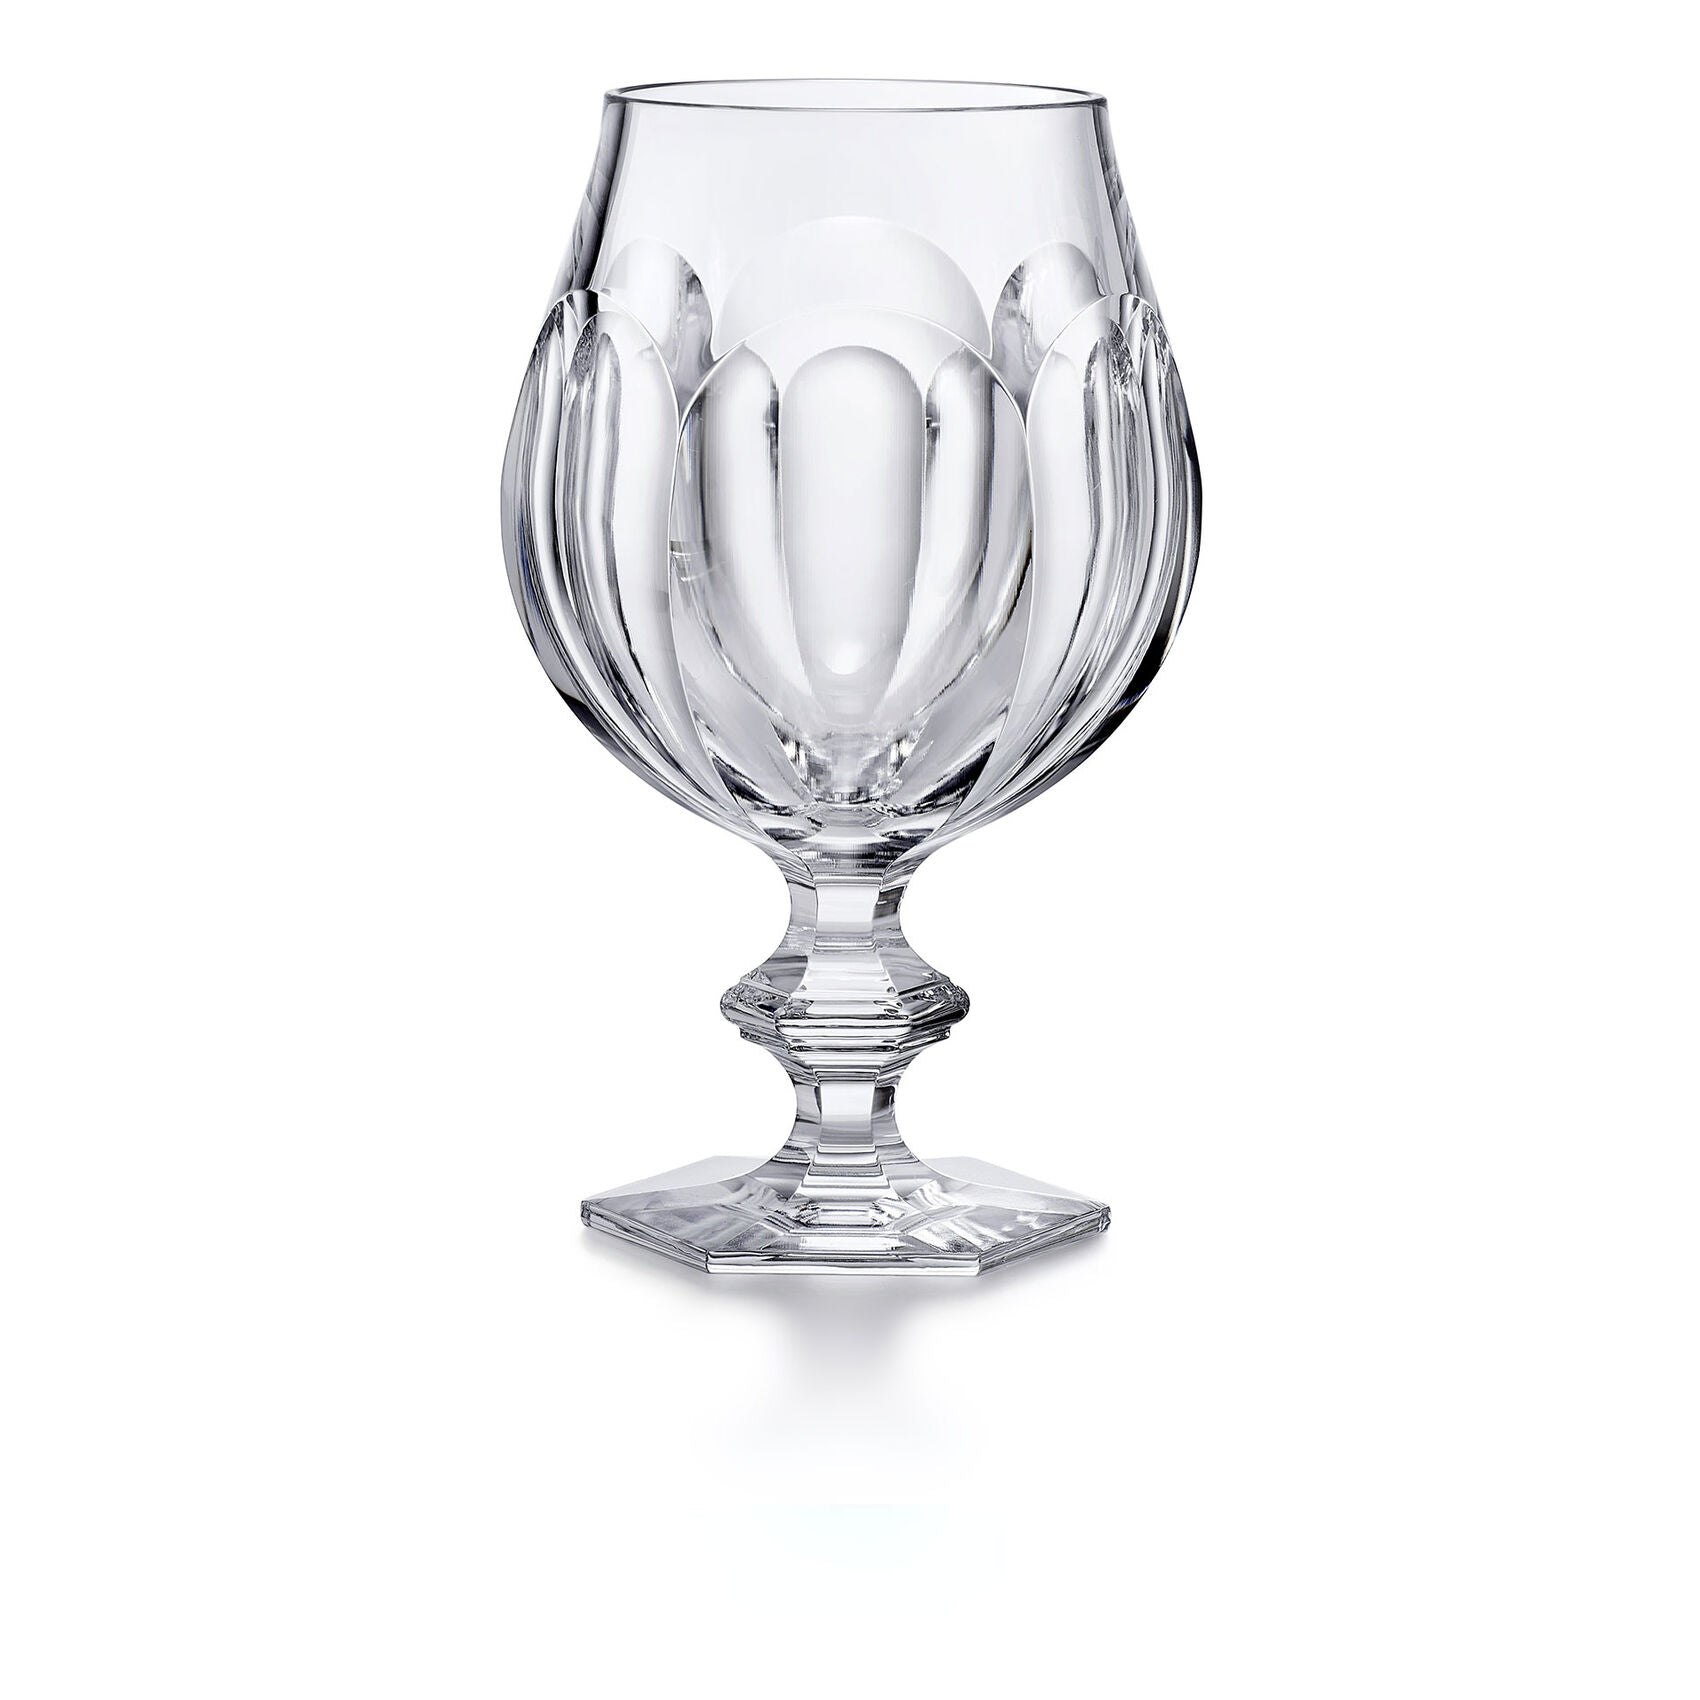 Baccarat Harcourt Beer Glass by Marcel Wanders